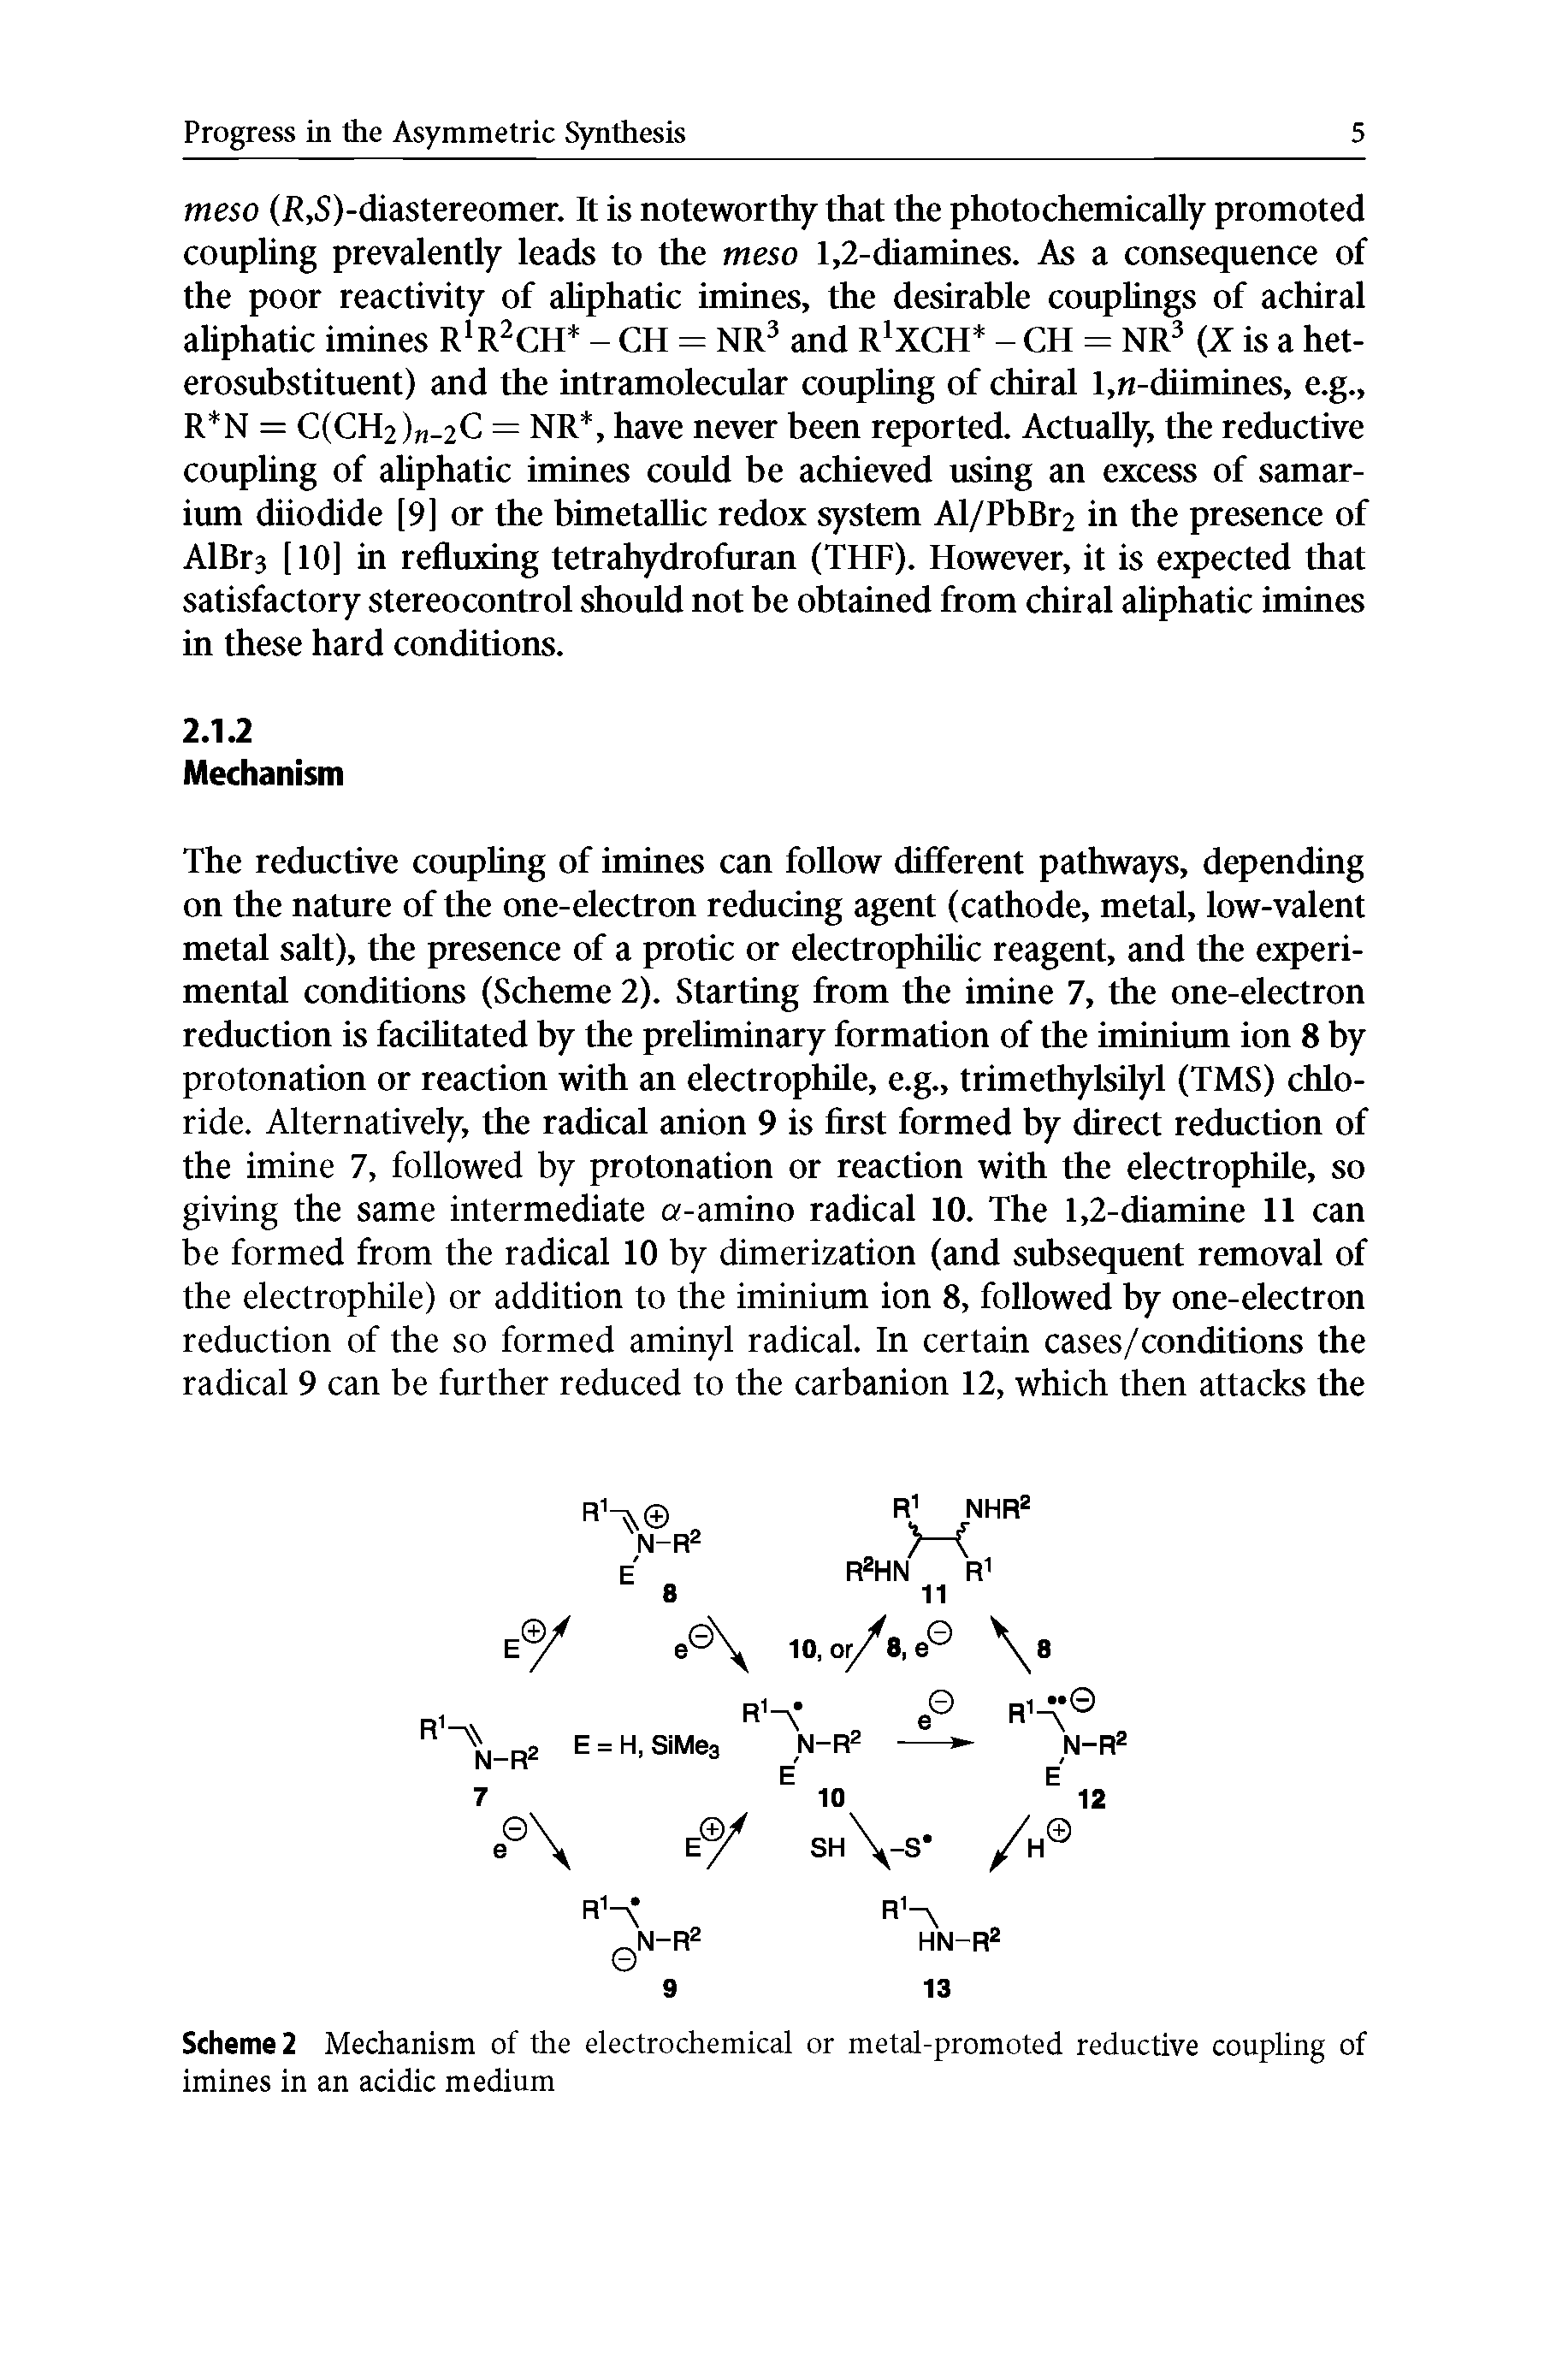 Scheme 2 Mechanism of the electrochemical or metal-promoted reductive coupling of imines in an acidic medium...